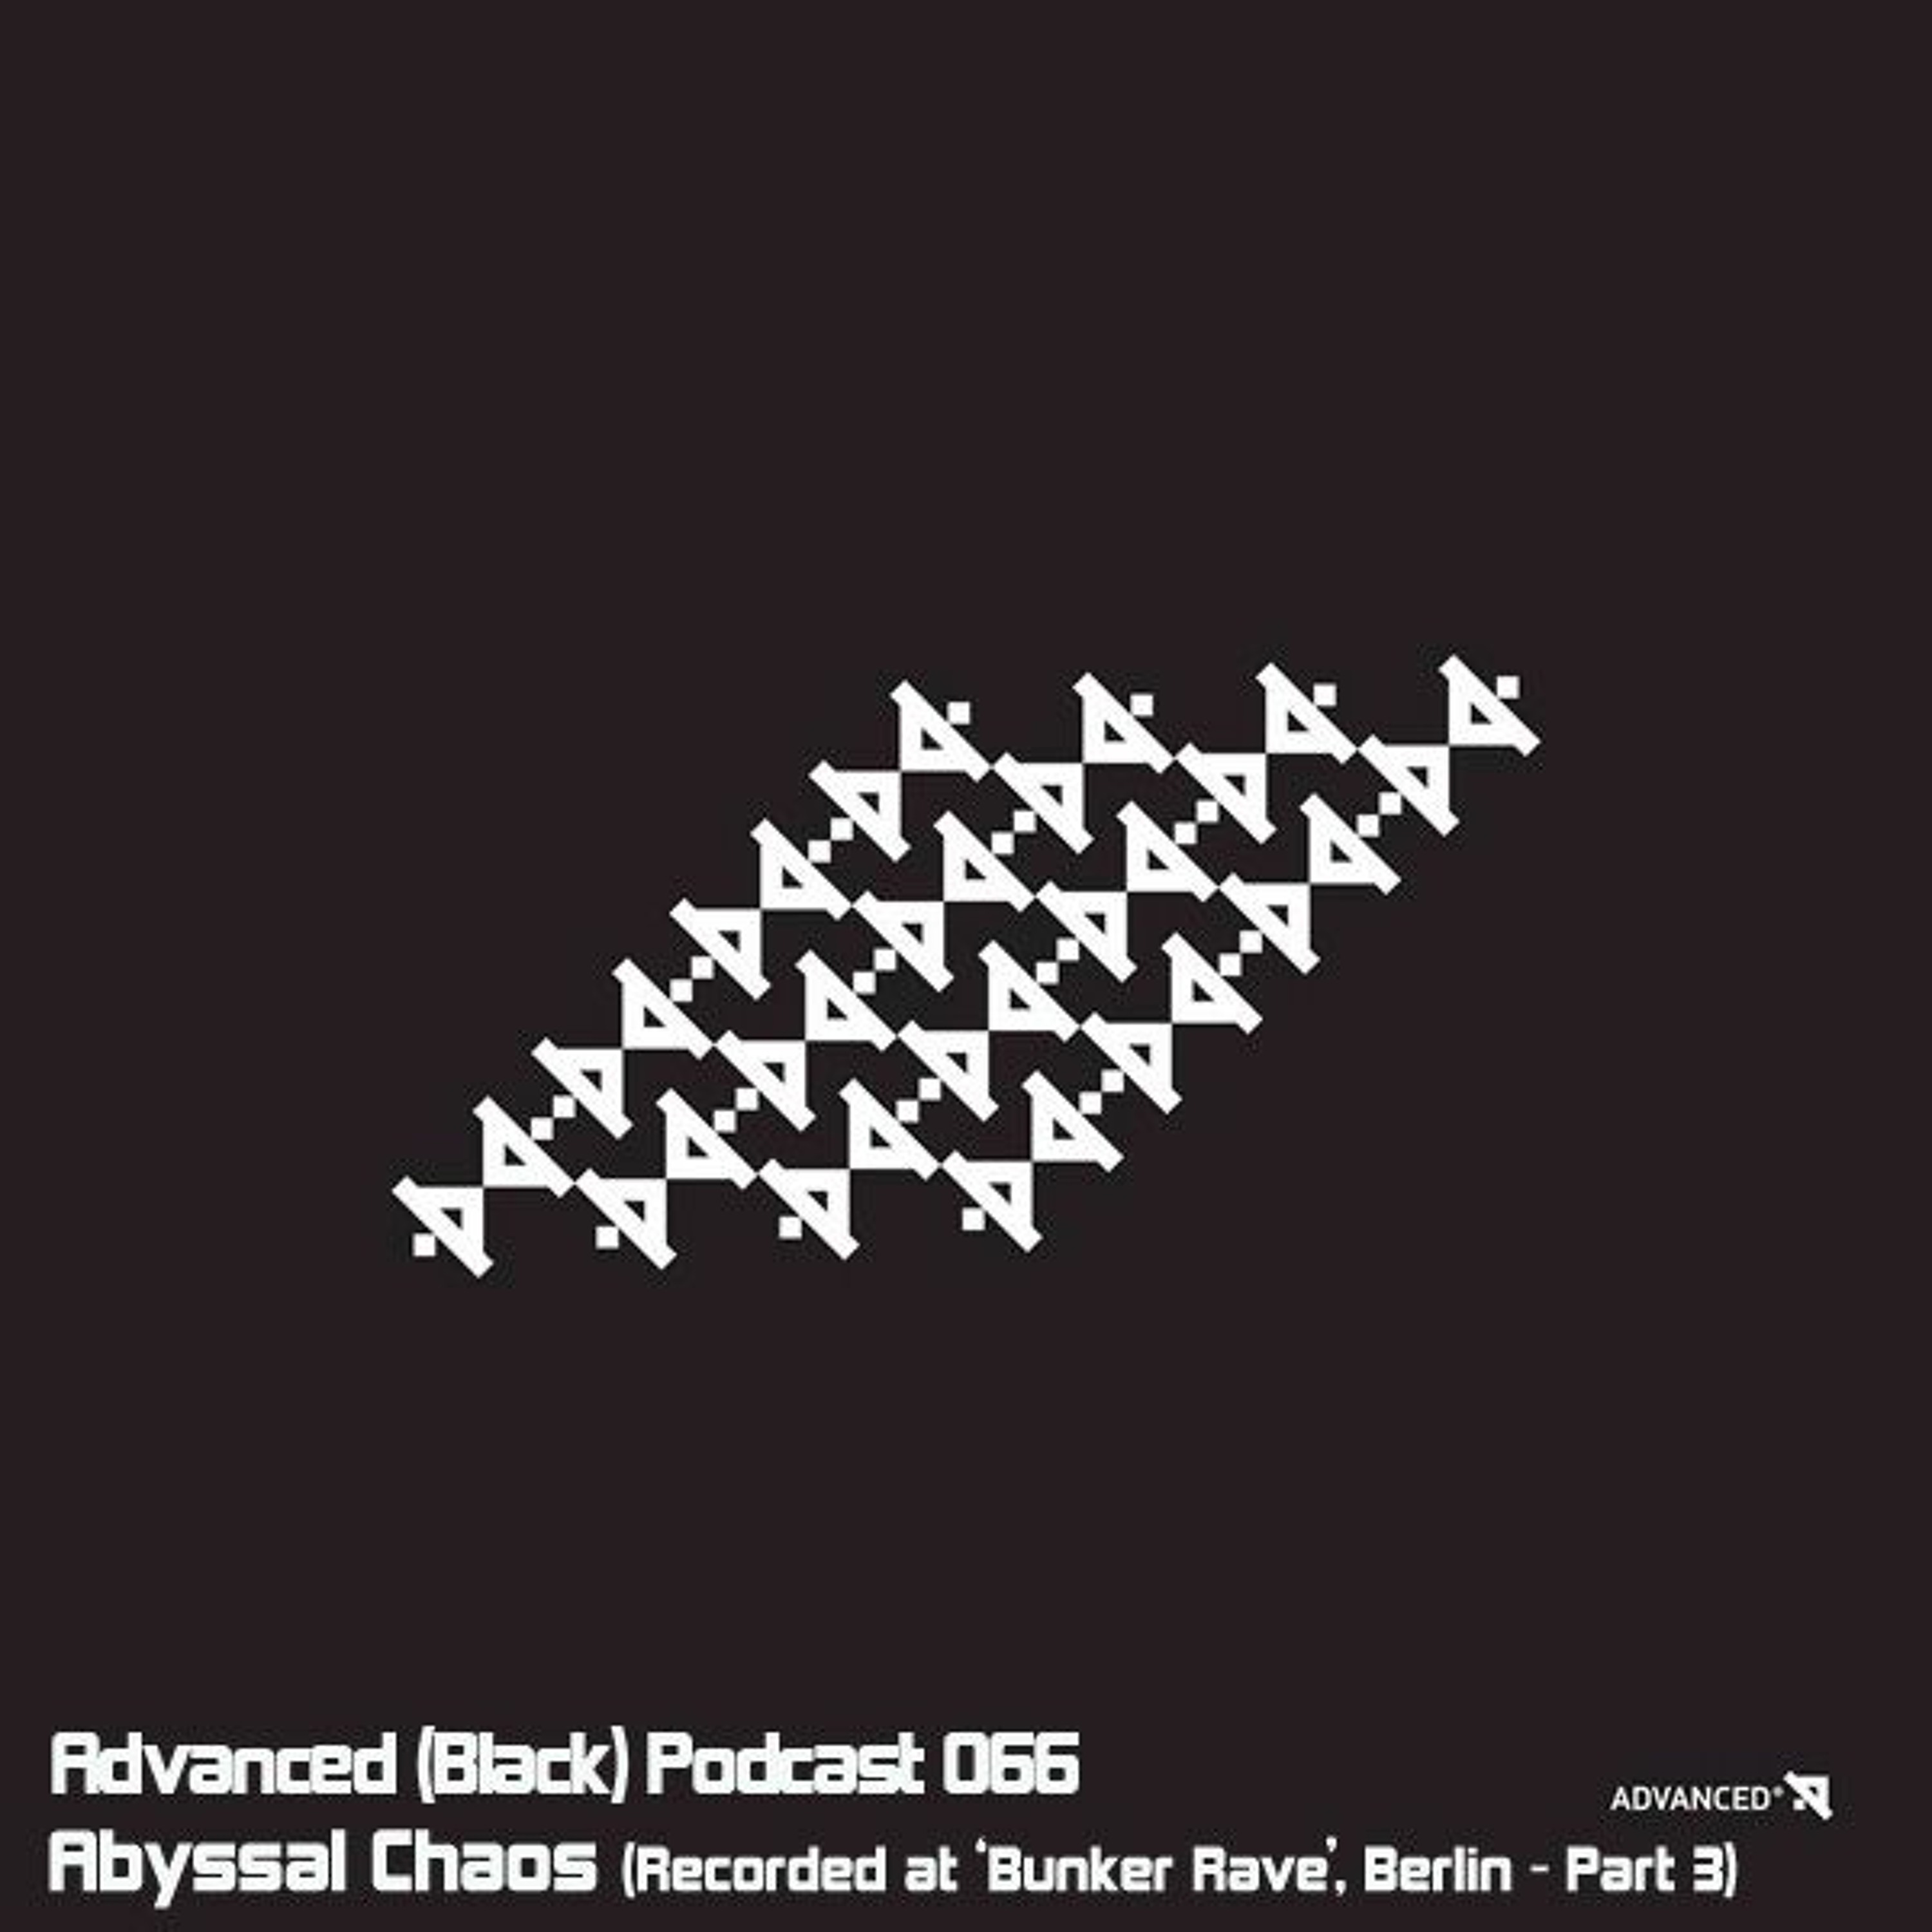 Advanced (Black) Podcast 066 with Abyssal Chaos (Recorded at Bunker Rave, Berlin - 16 HOURS [3/3])